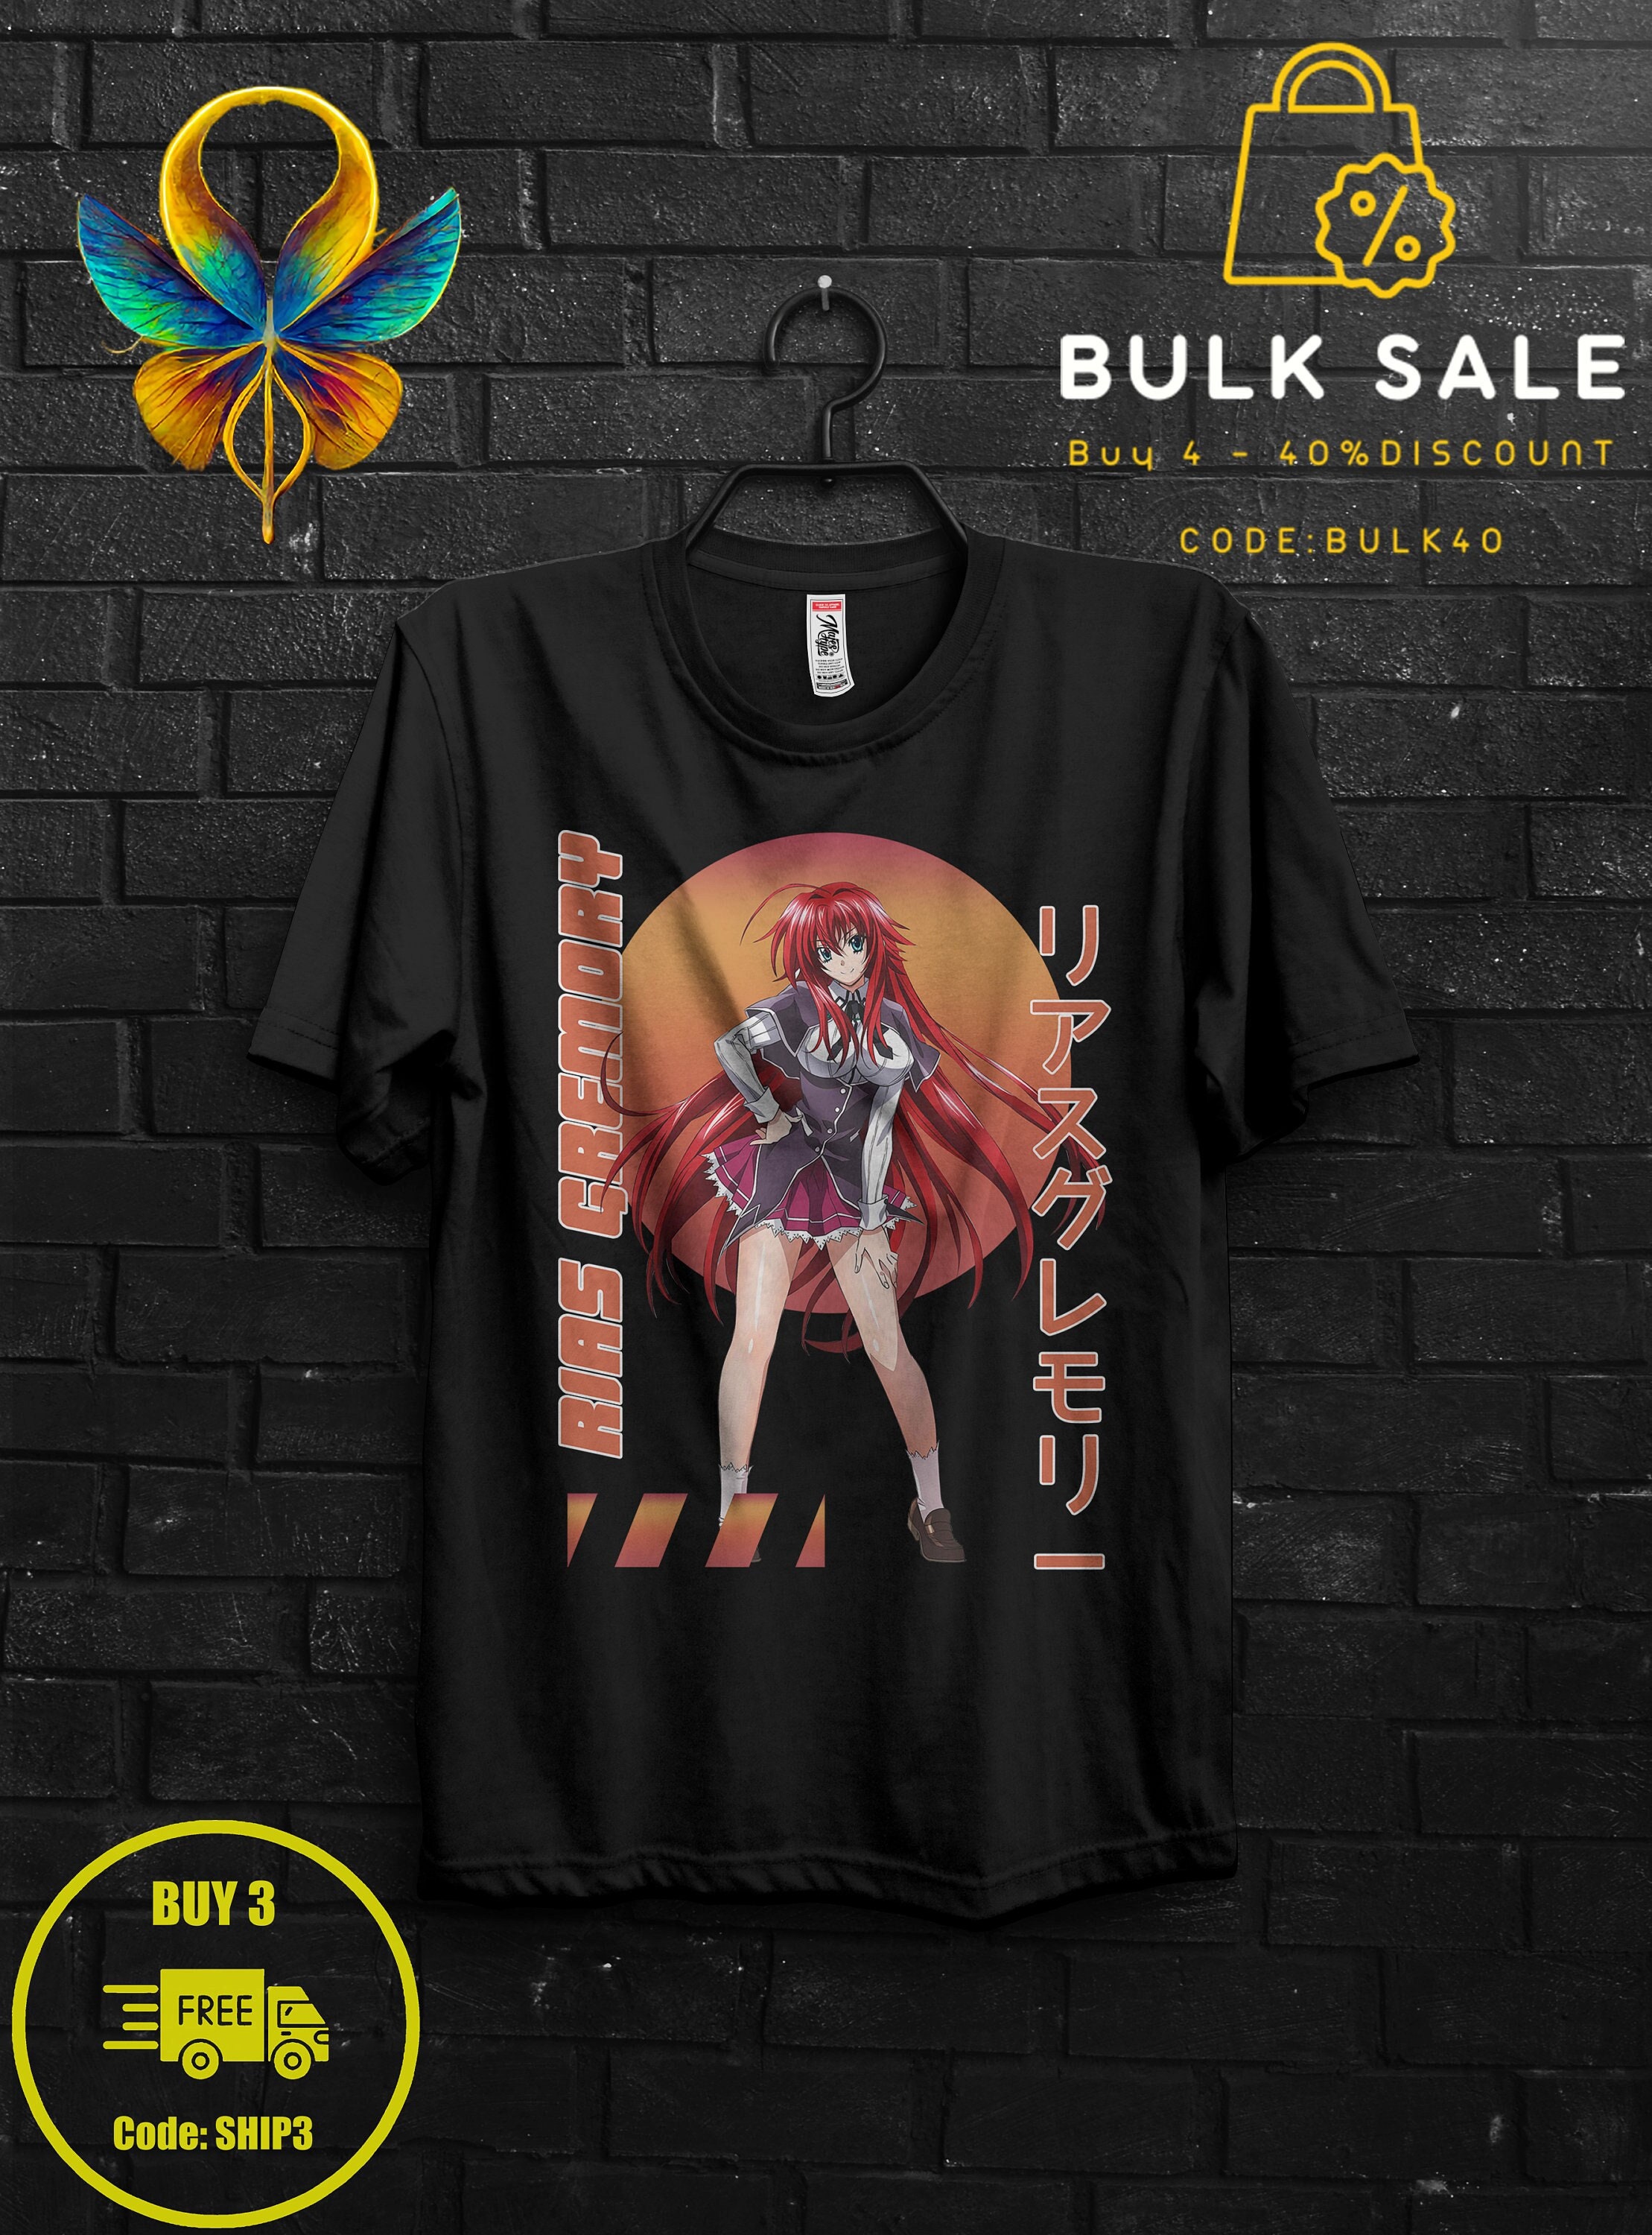 Rias Gremory Shirt Anime Gift Cosplay For Girl,Xenovia Appareal For Sitri,Issei Hyoudou Sweat,Rossweisse Tshirt For Her,High School DxD Tee 1586083884